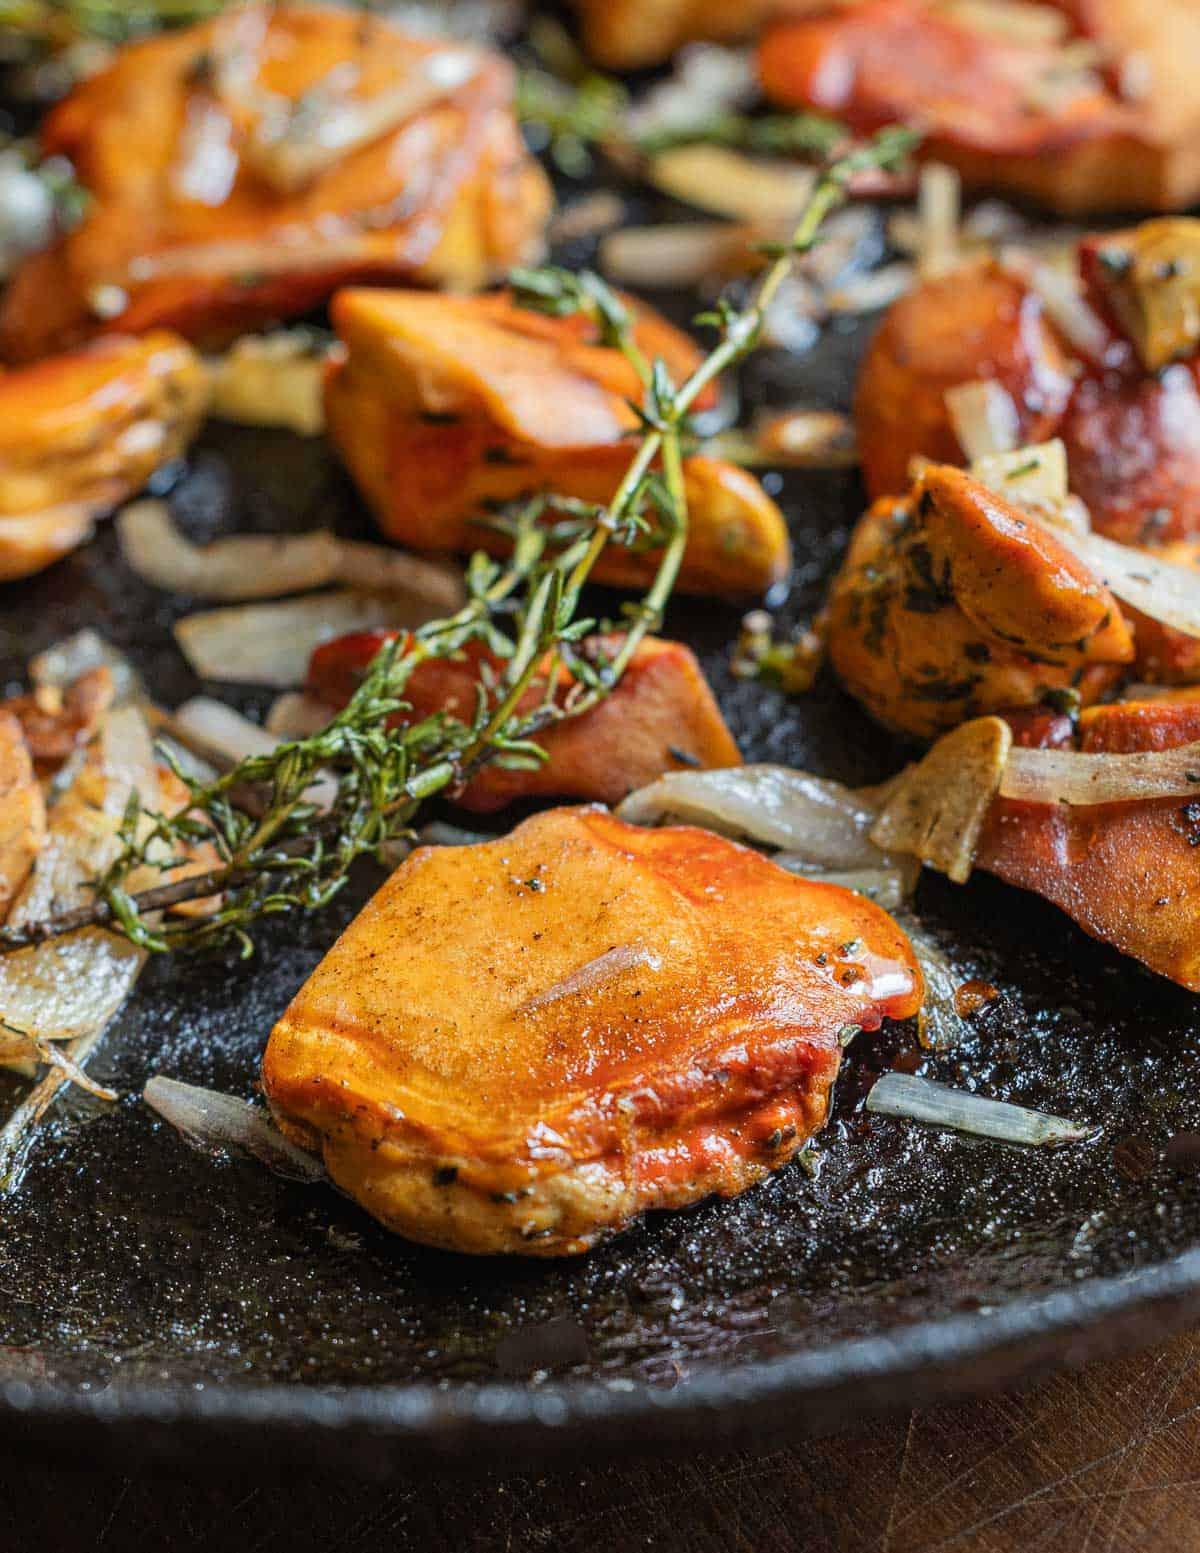 A close up image of chicken of the woods mushrooms cooking in a pan with shallots, garlic, and thyme sprigs